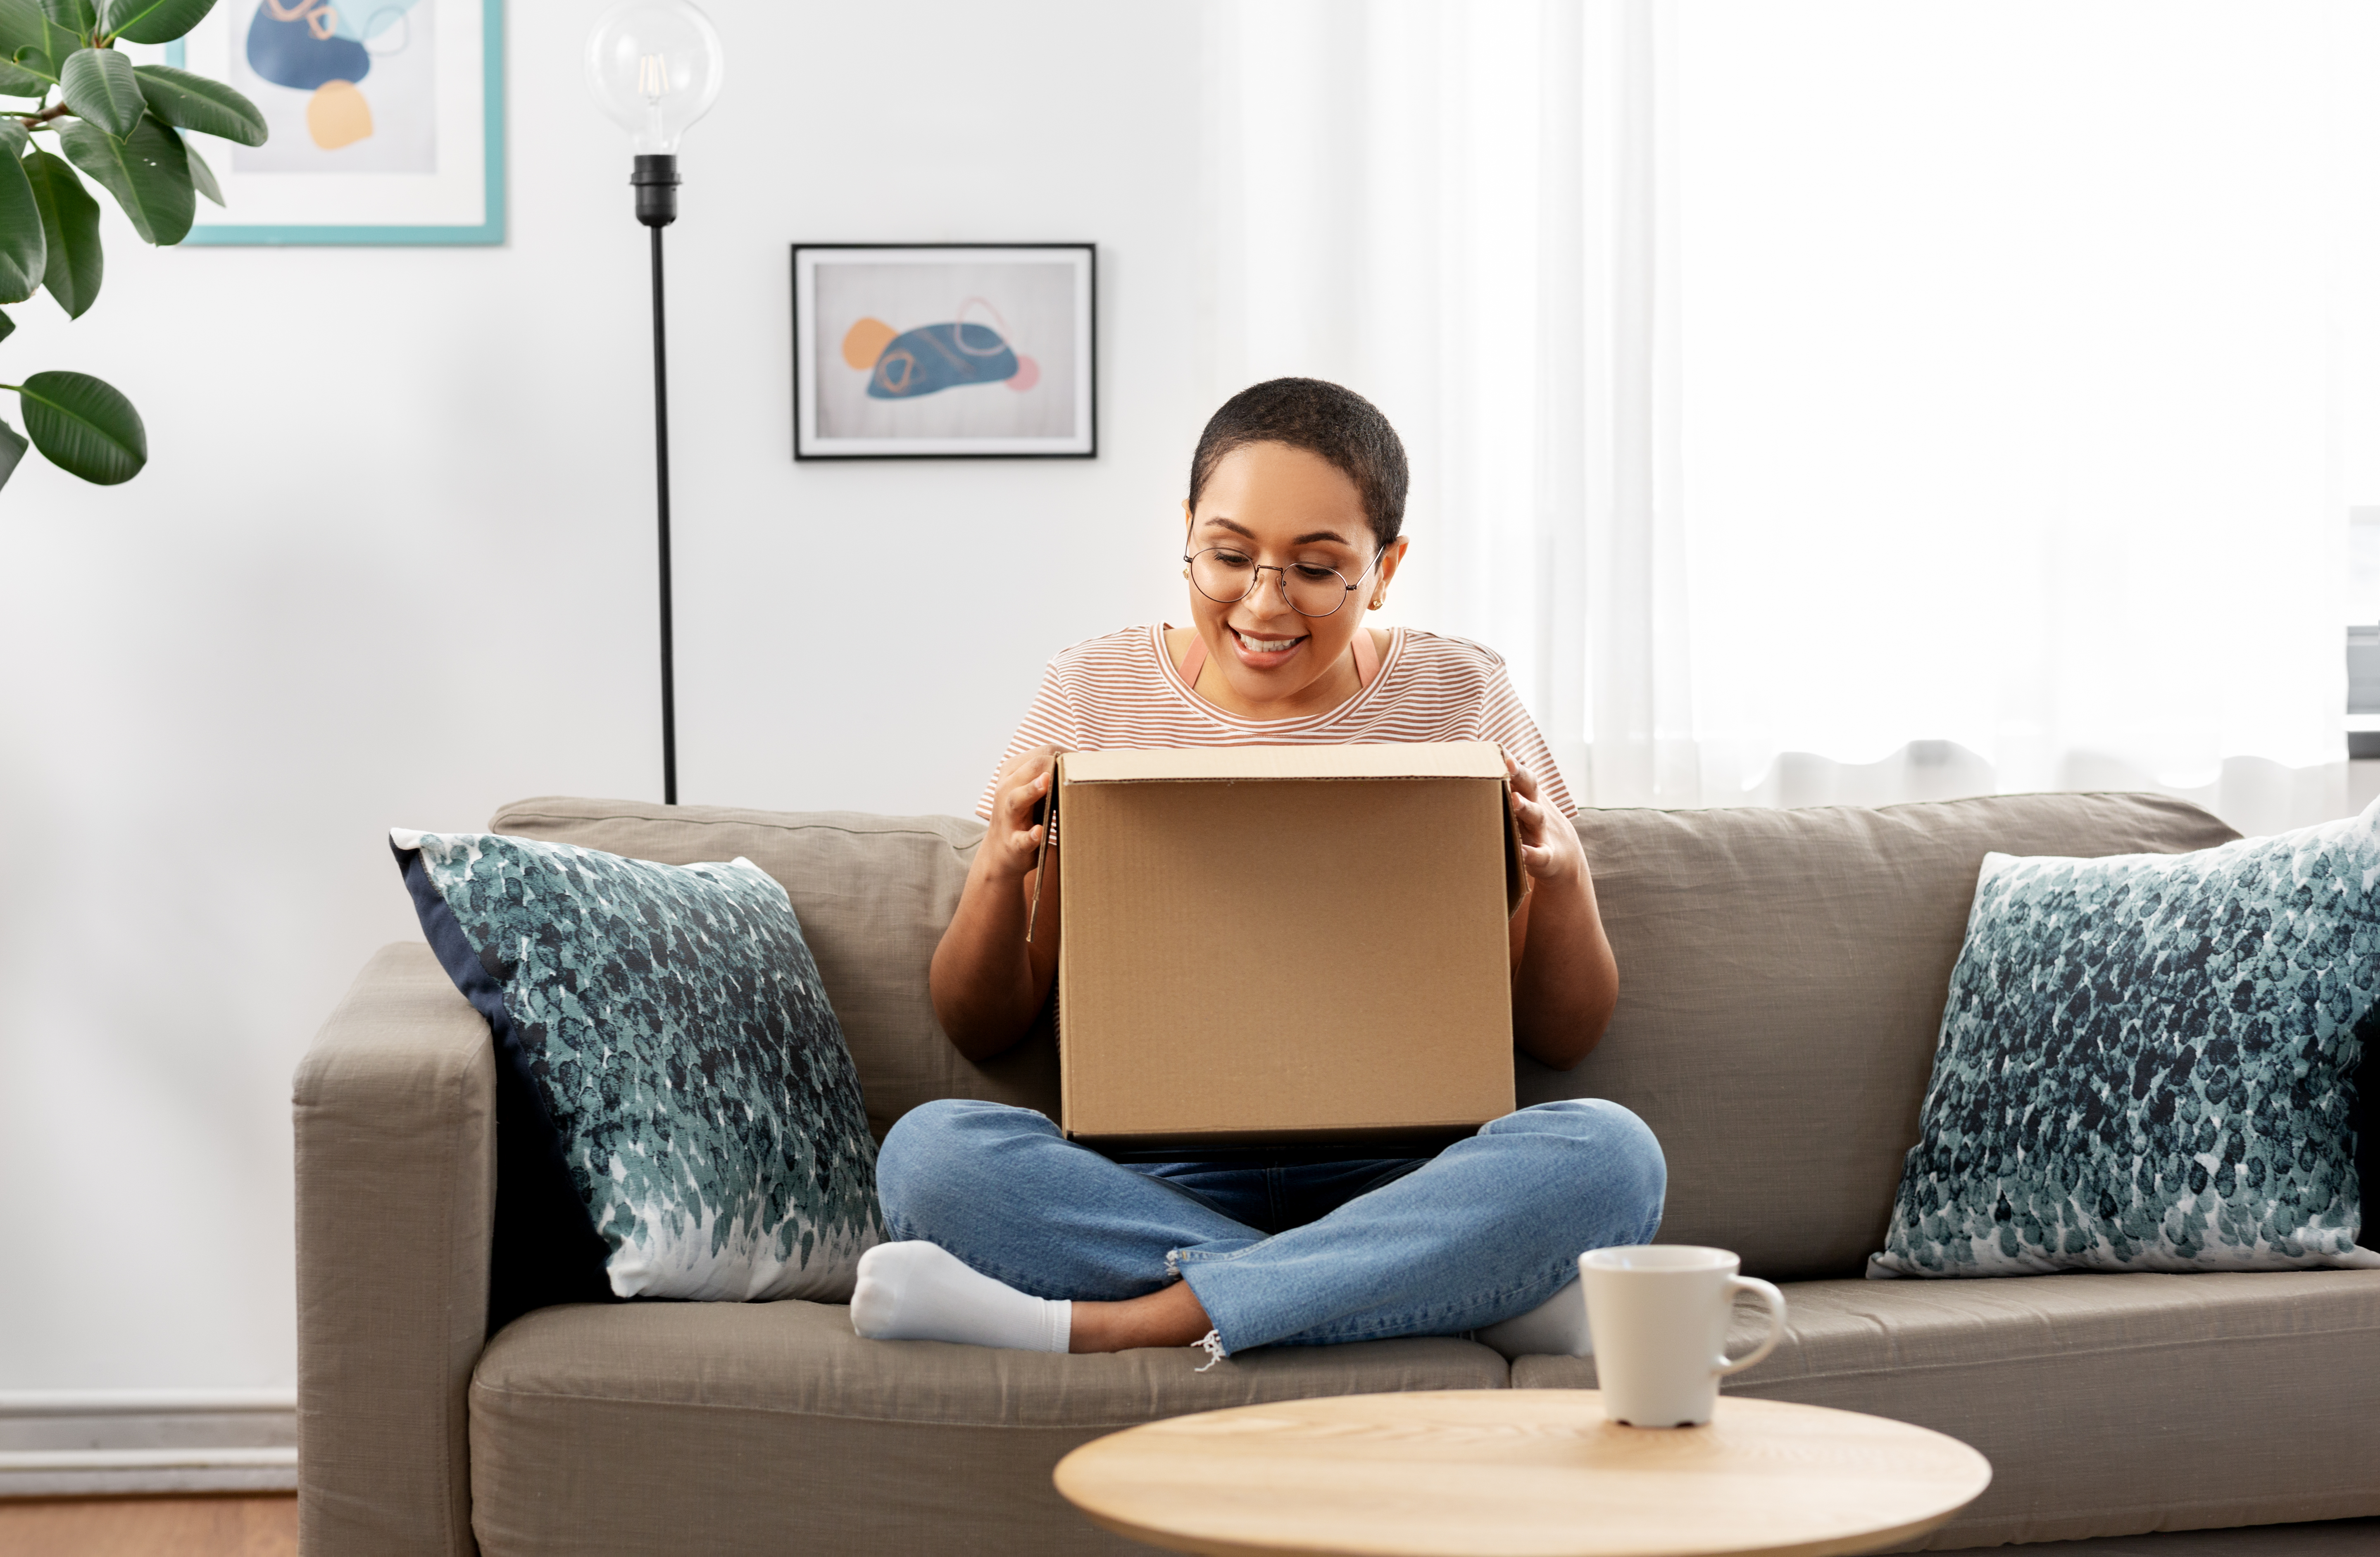 Woman sitting on the couch smiling looking into a box